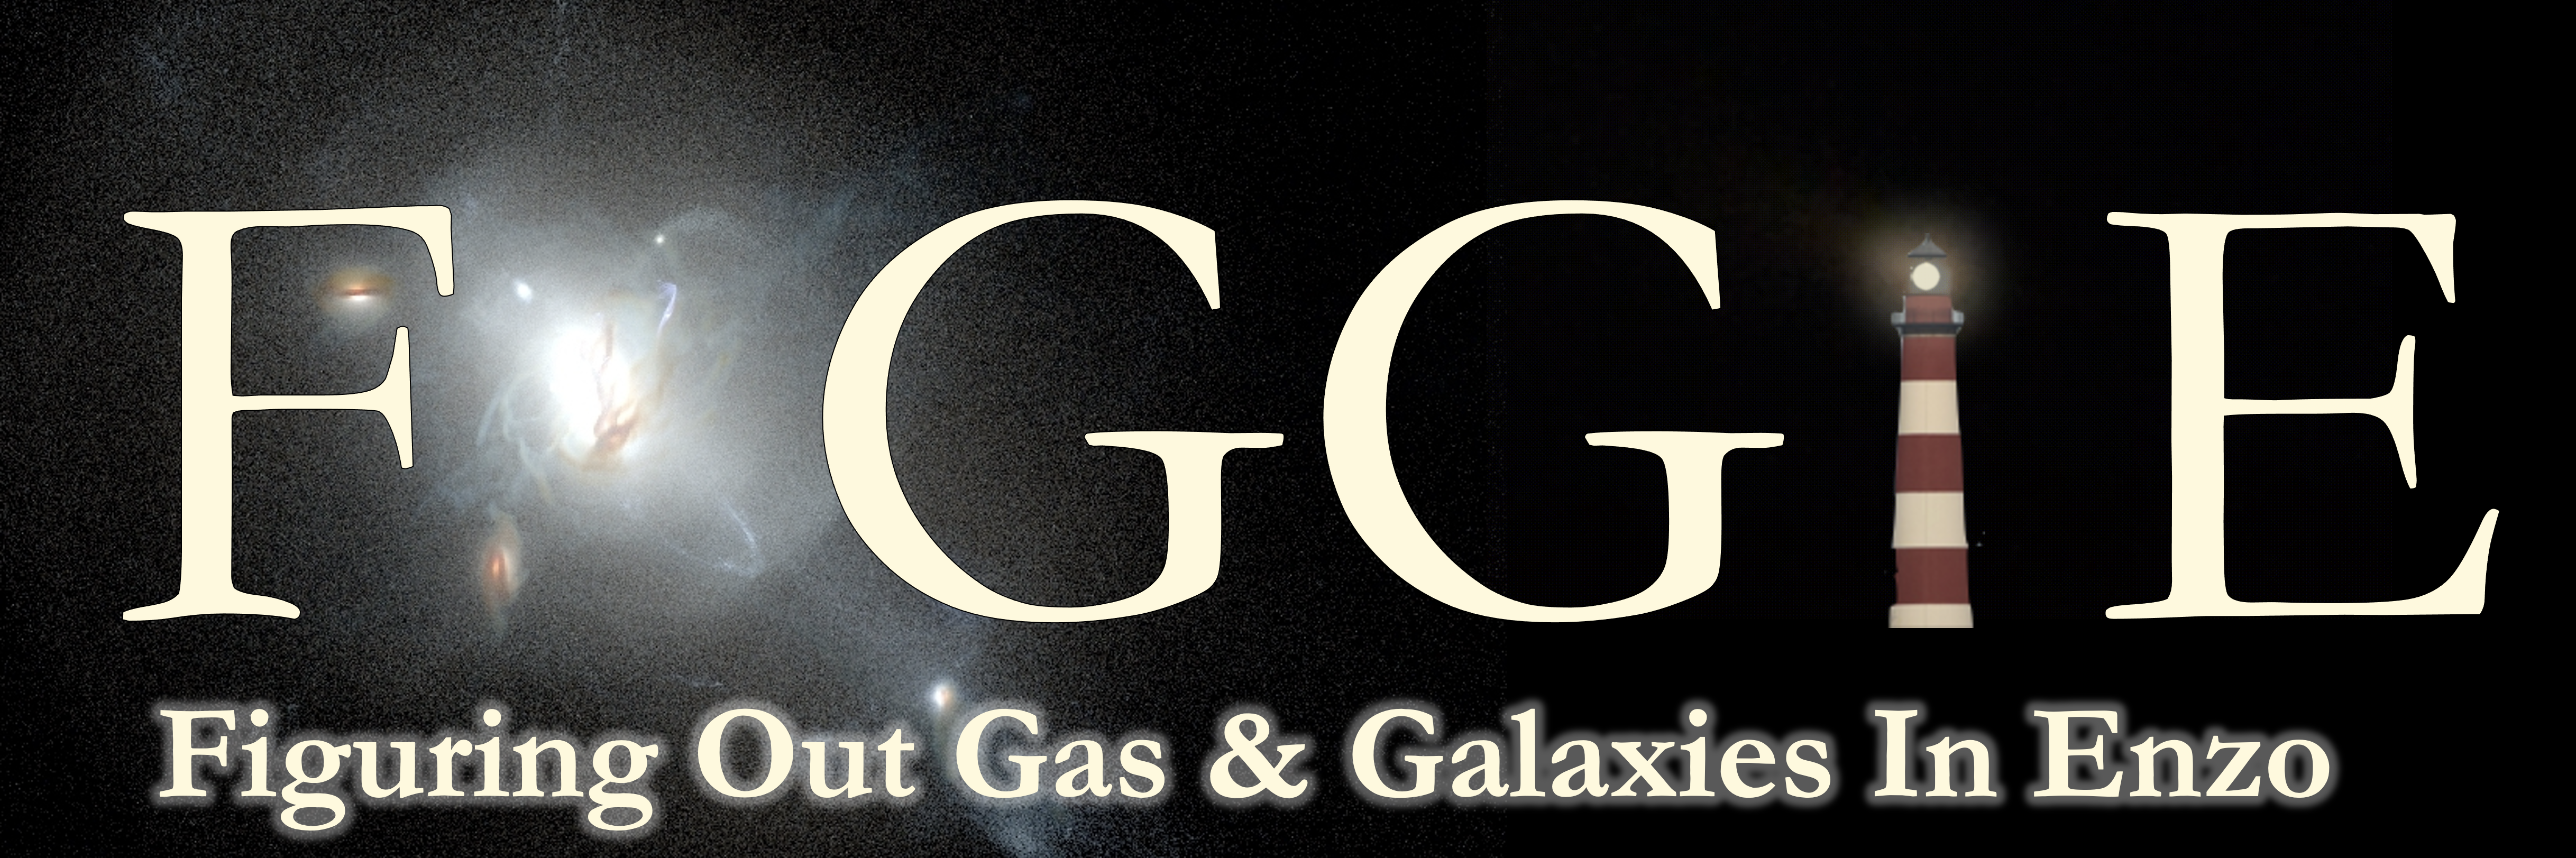 Figuring
								Out Gas
								&
								Galaxies
								In Enzo
								logo
								with
								synthetic
								galaxy image